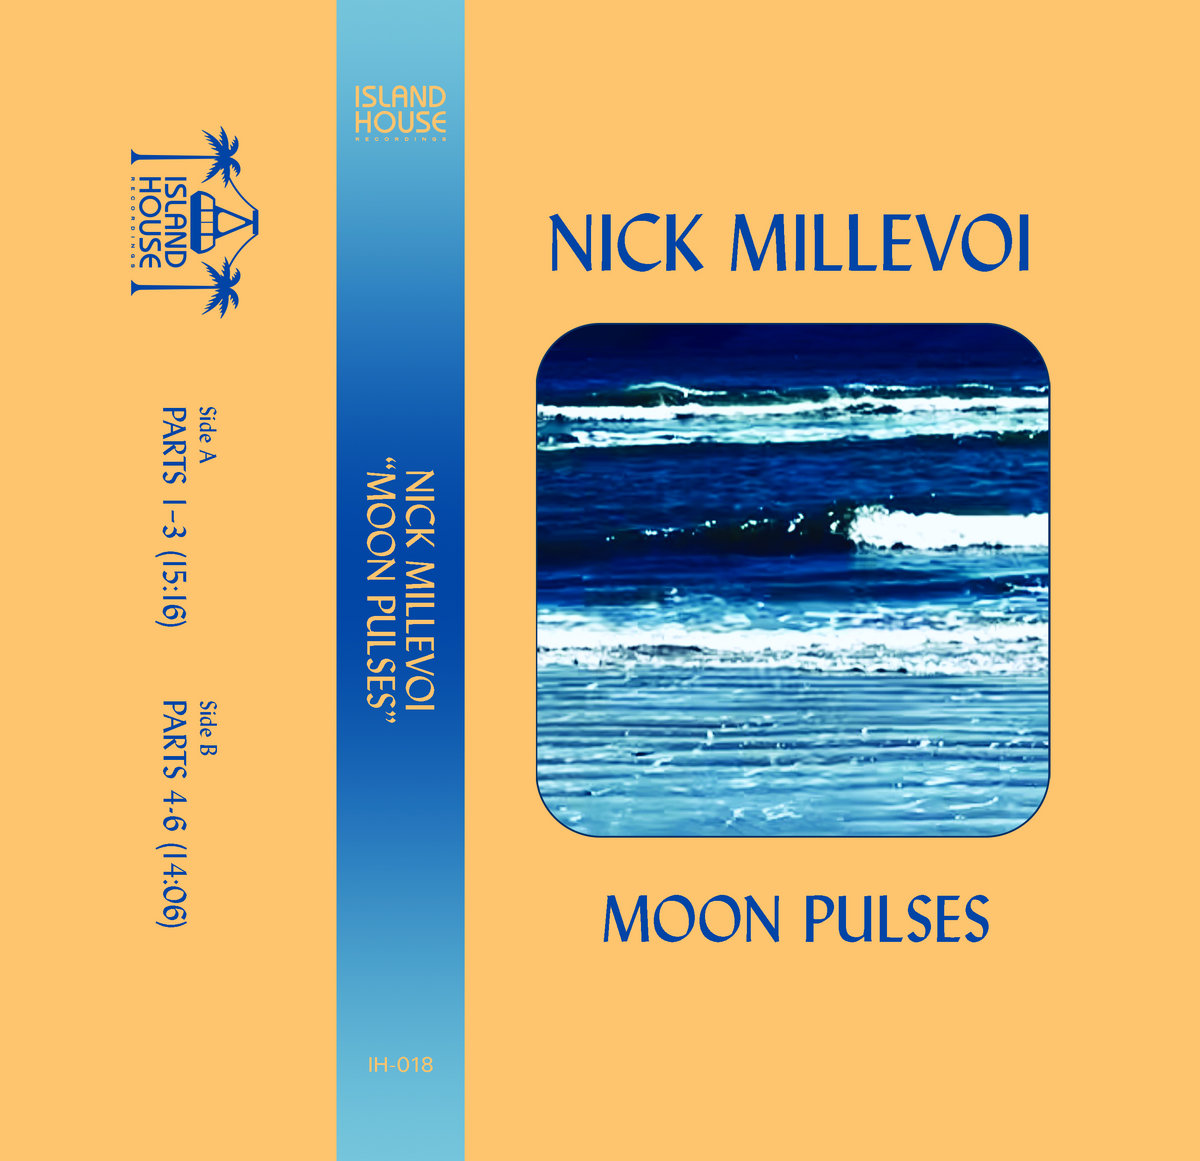 New Music: Moon Pulses by Nick Millevoi